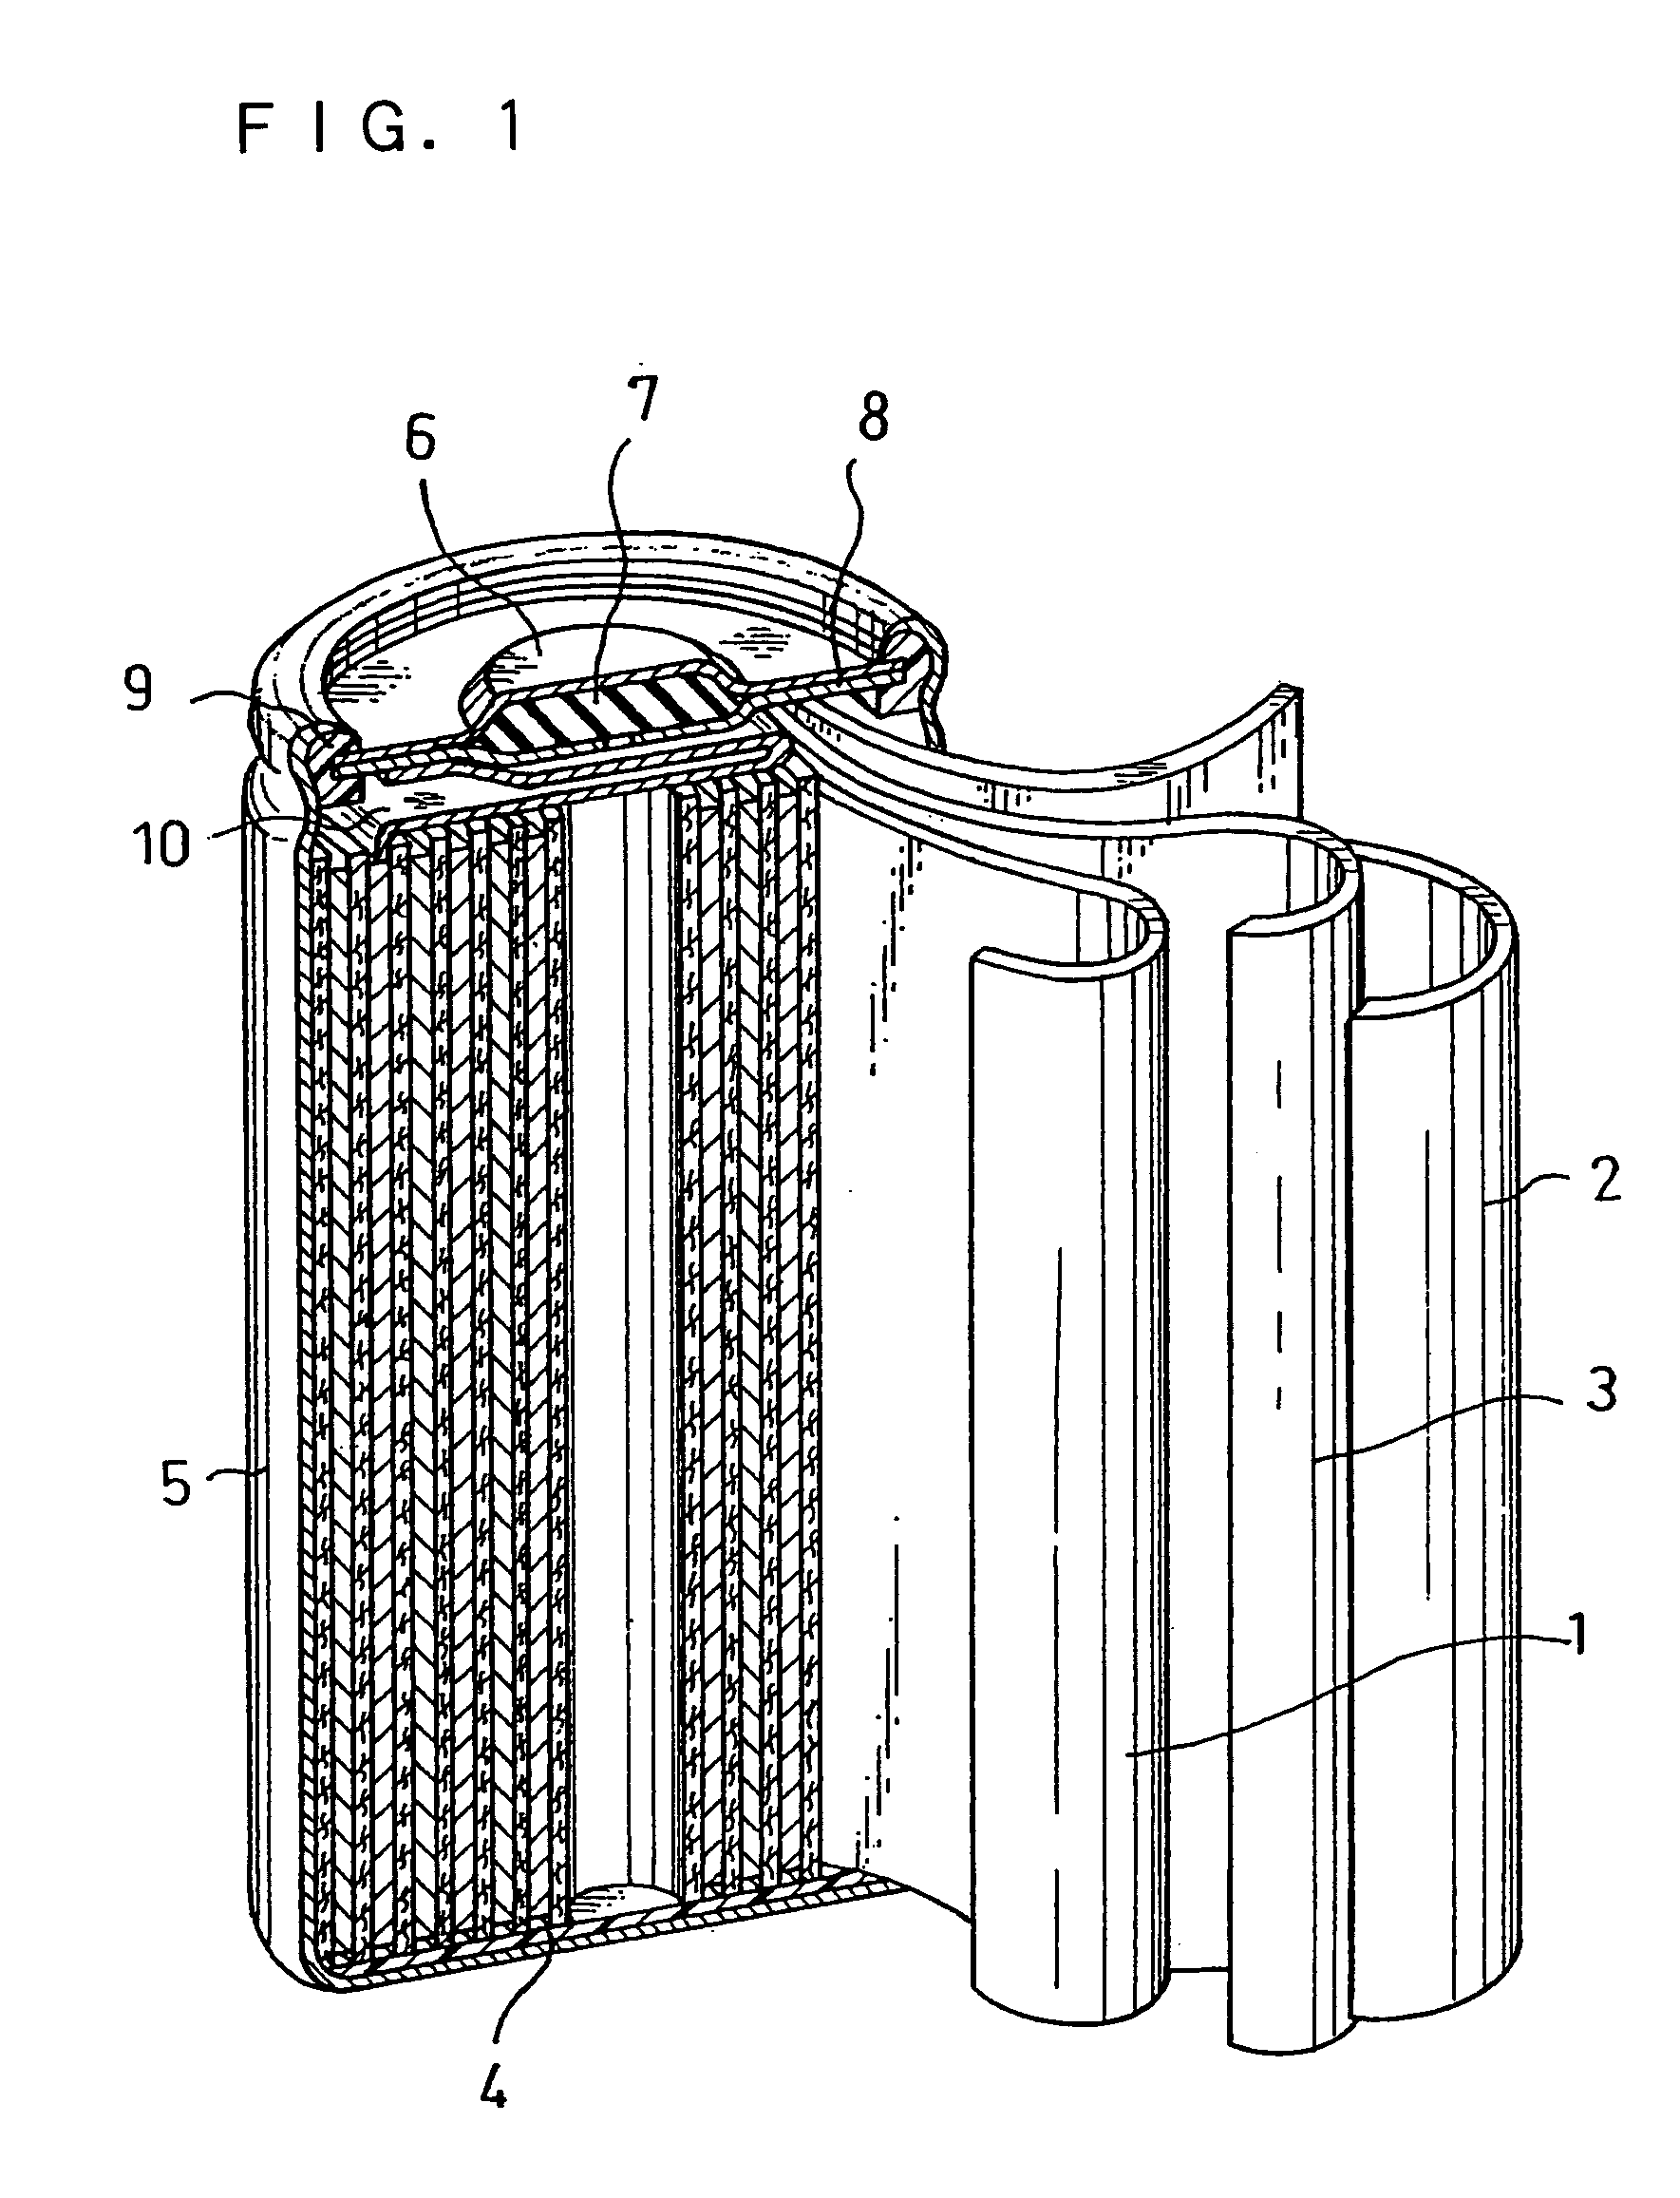 Alkaline storage battery and method for producing the same